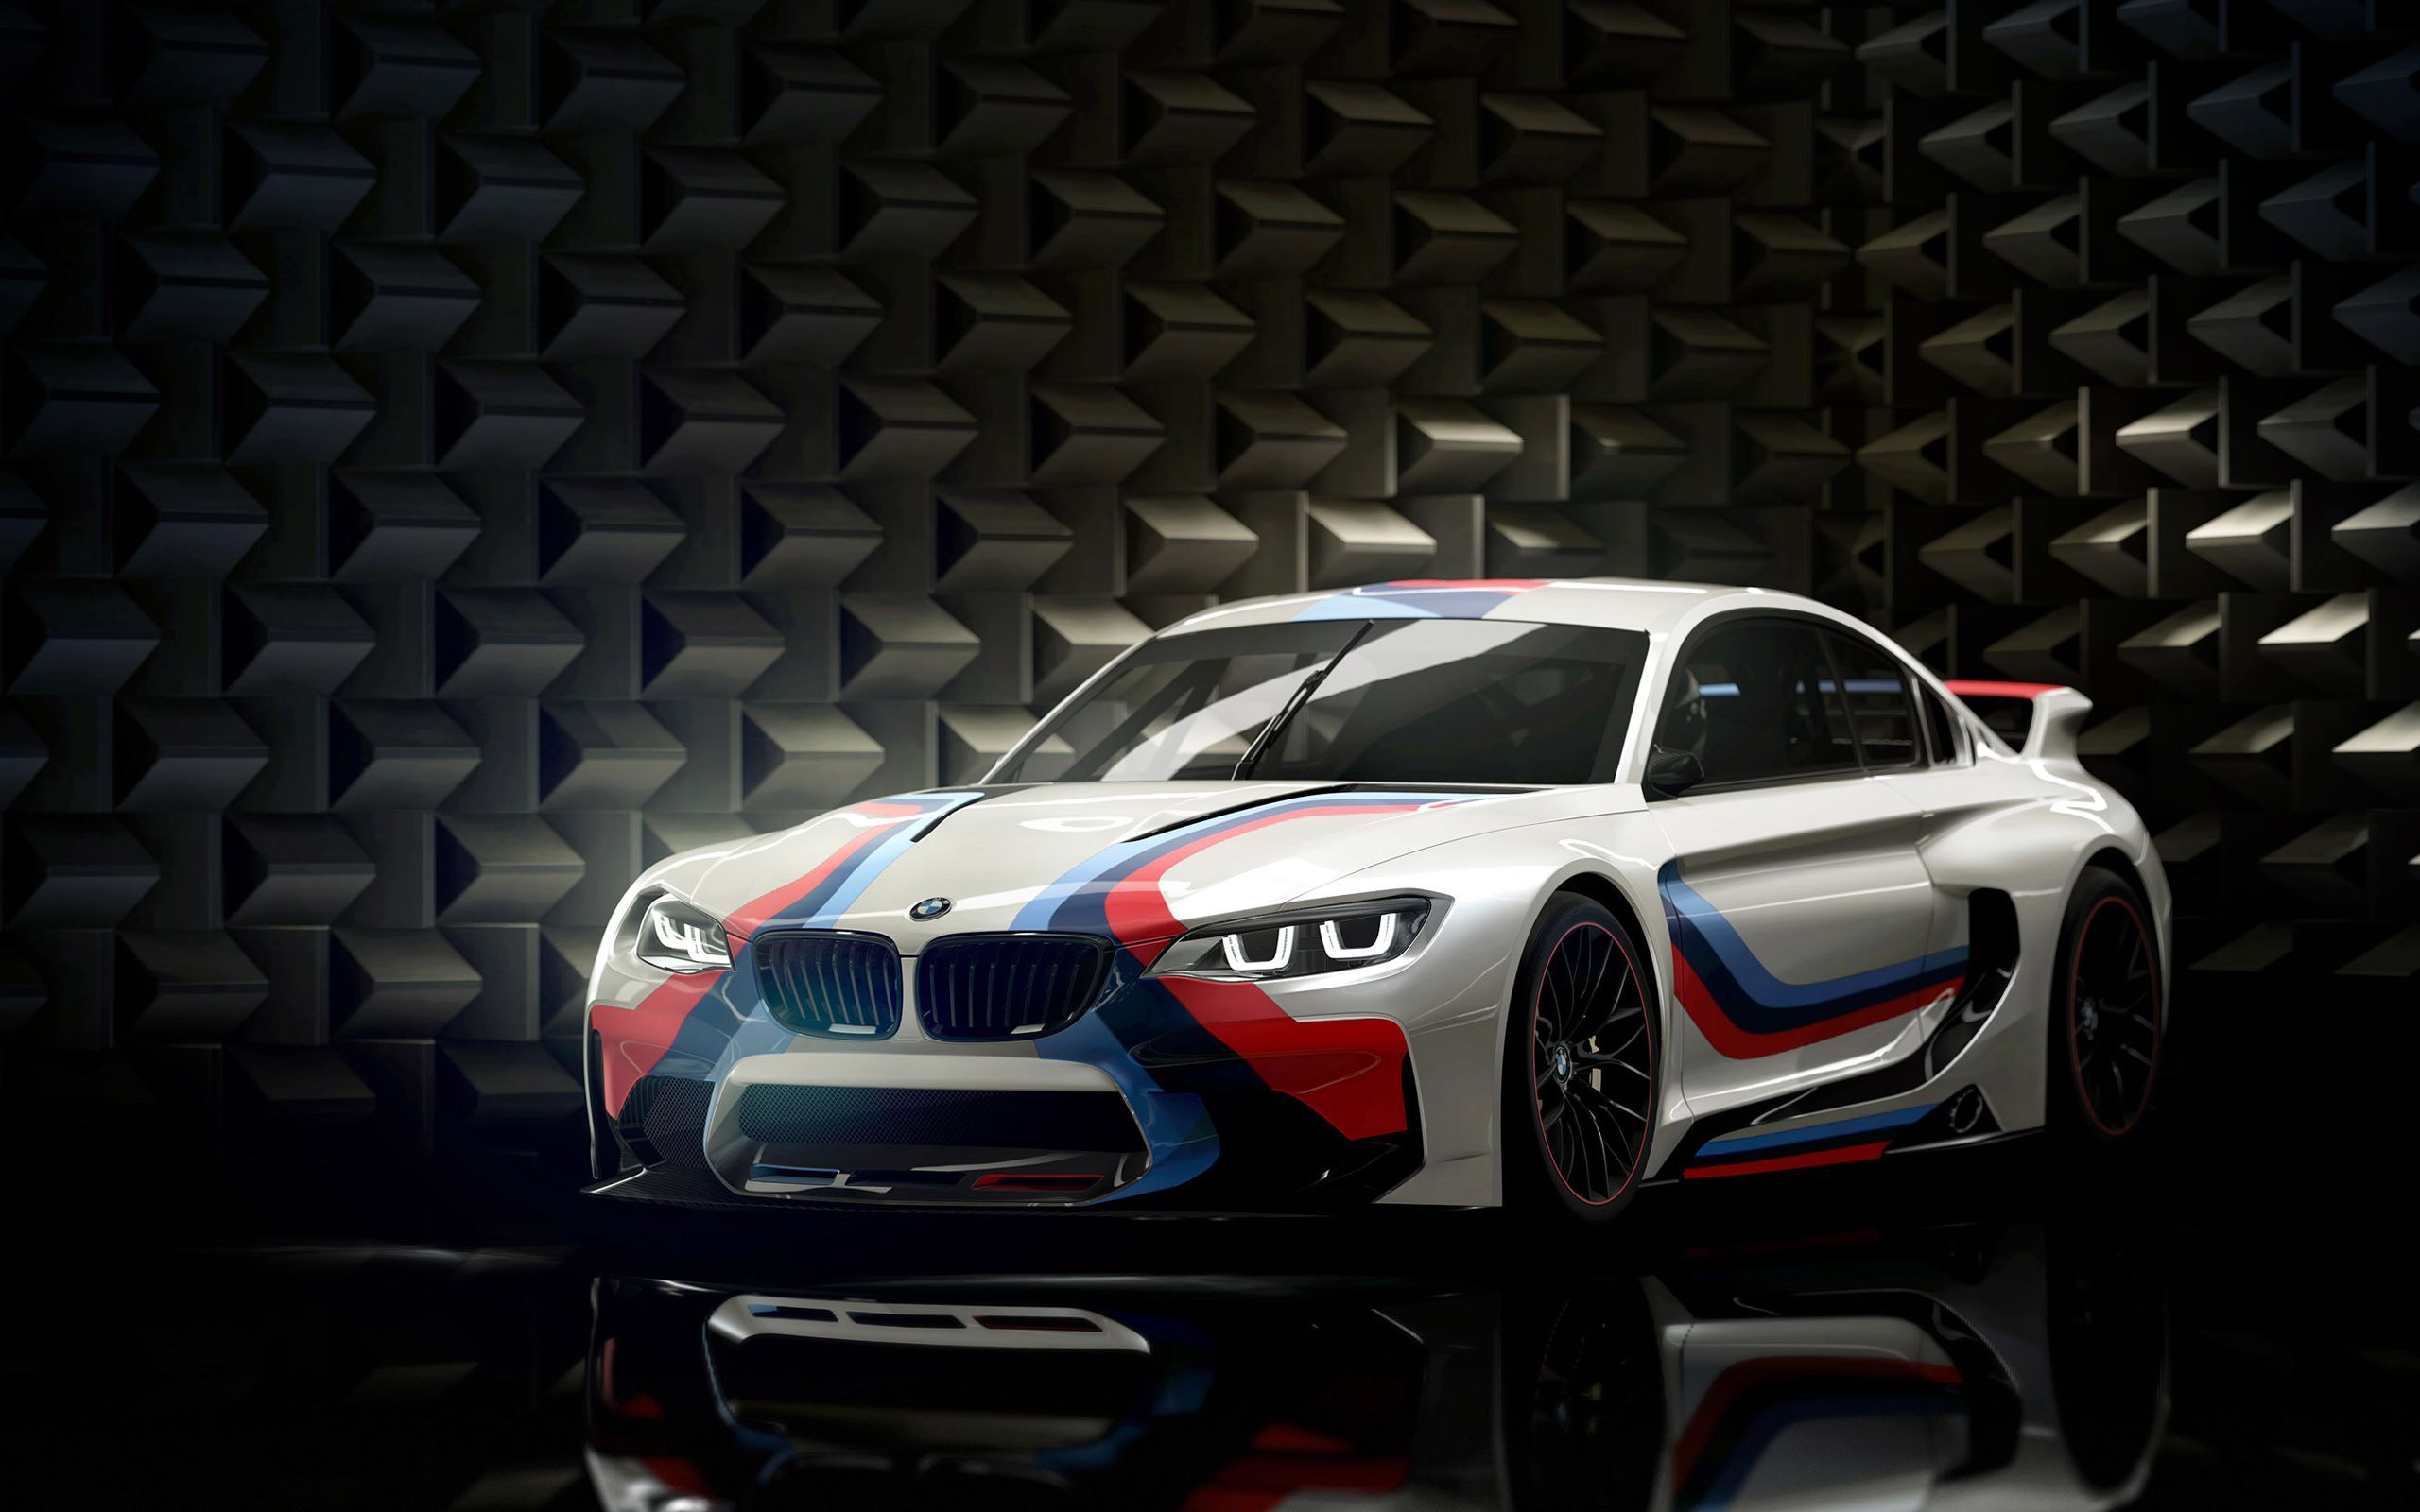 BMW Wallpapers - HD Backgrounds